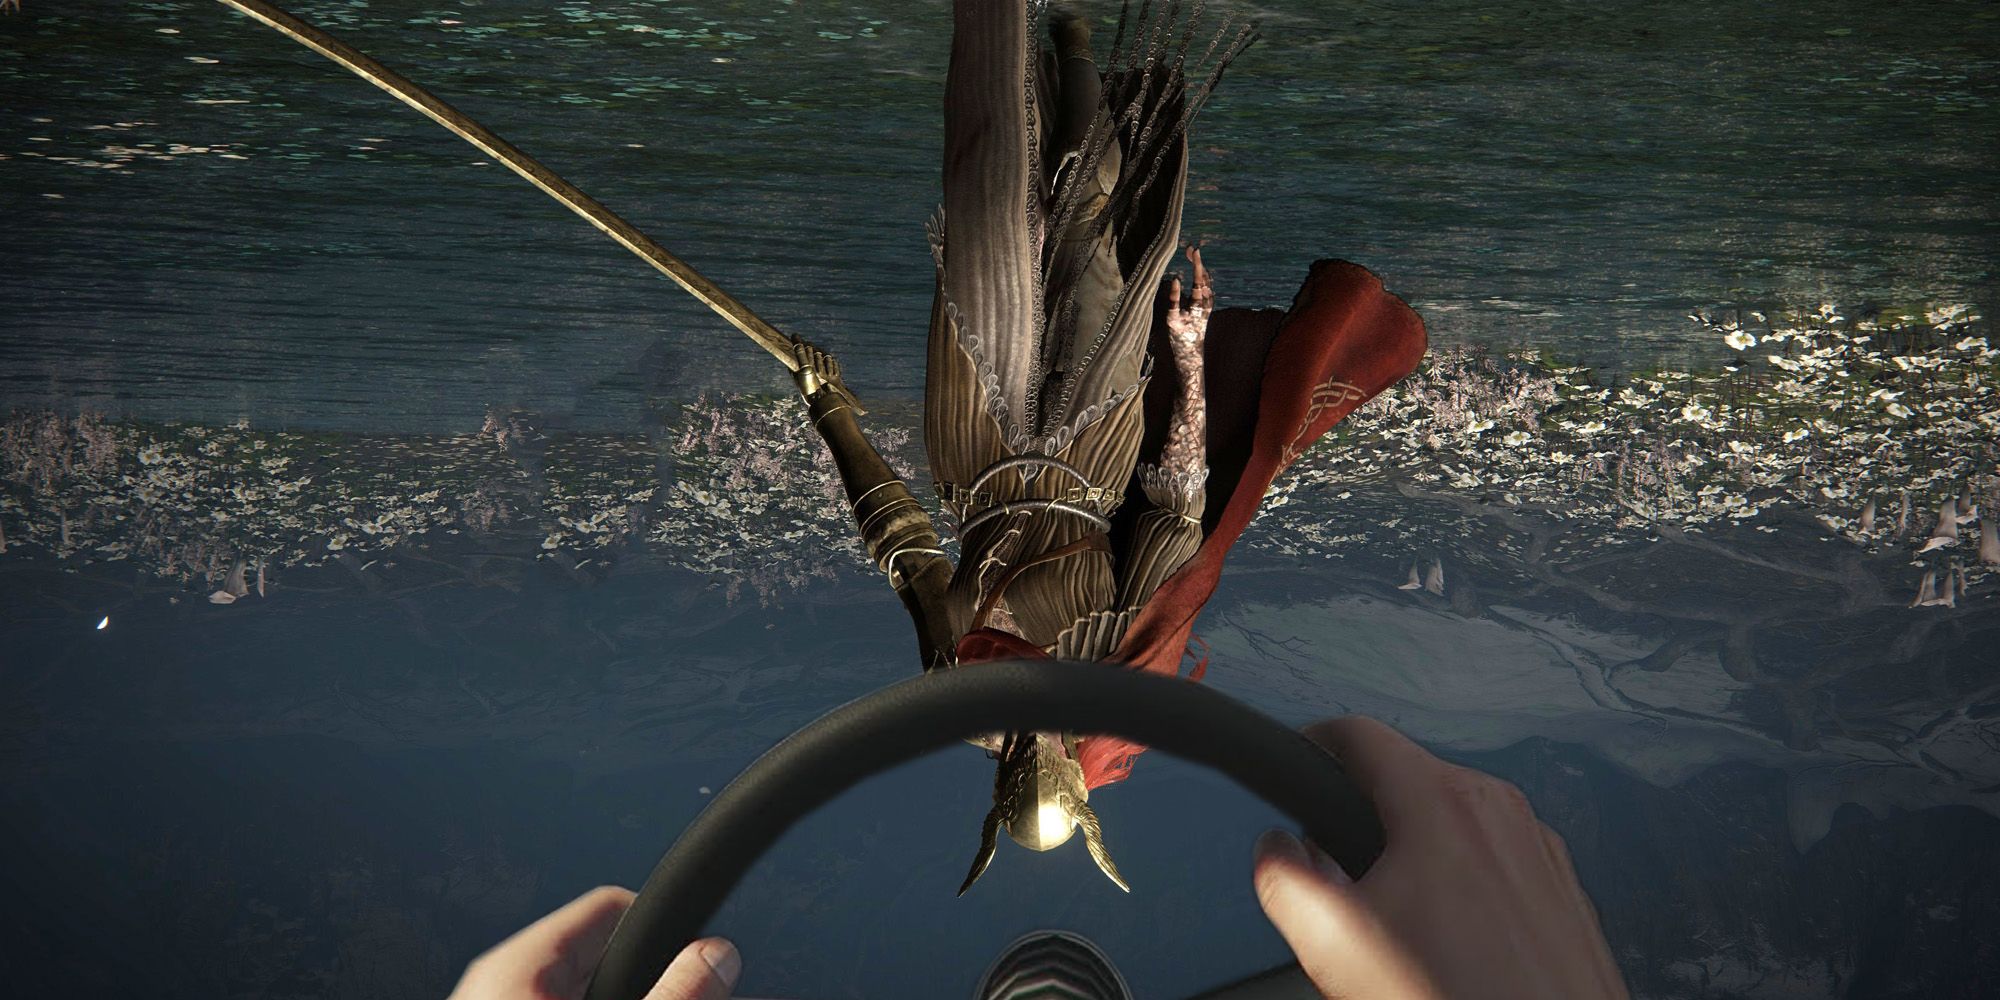 Someone Is Playing Elden Ring Upside Down With A Steering Wheel